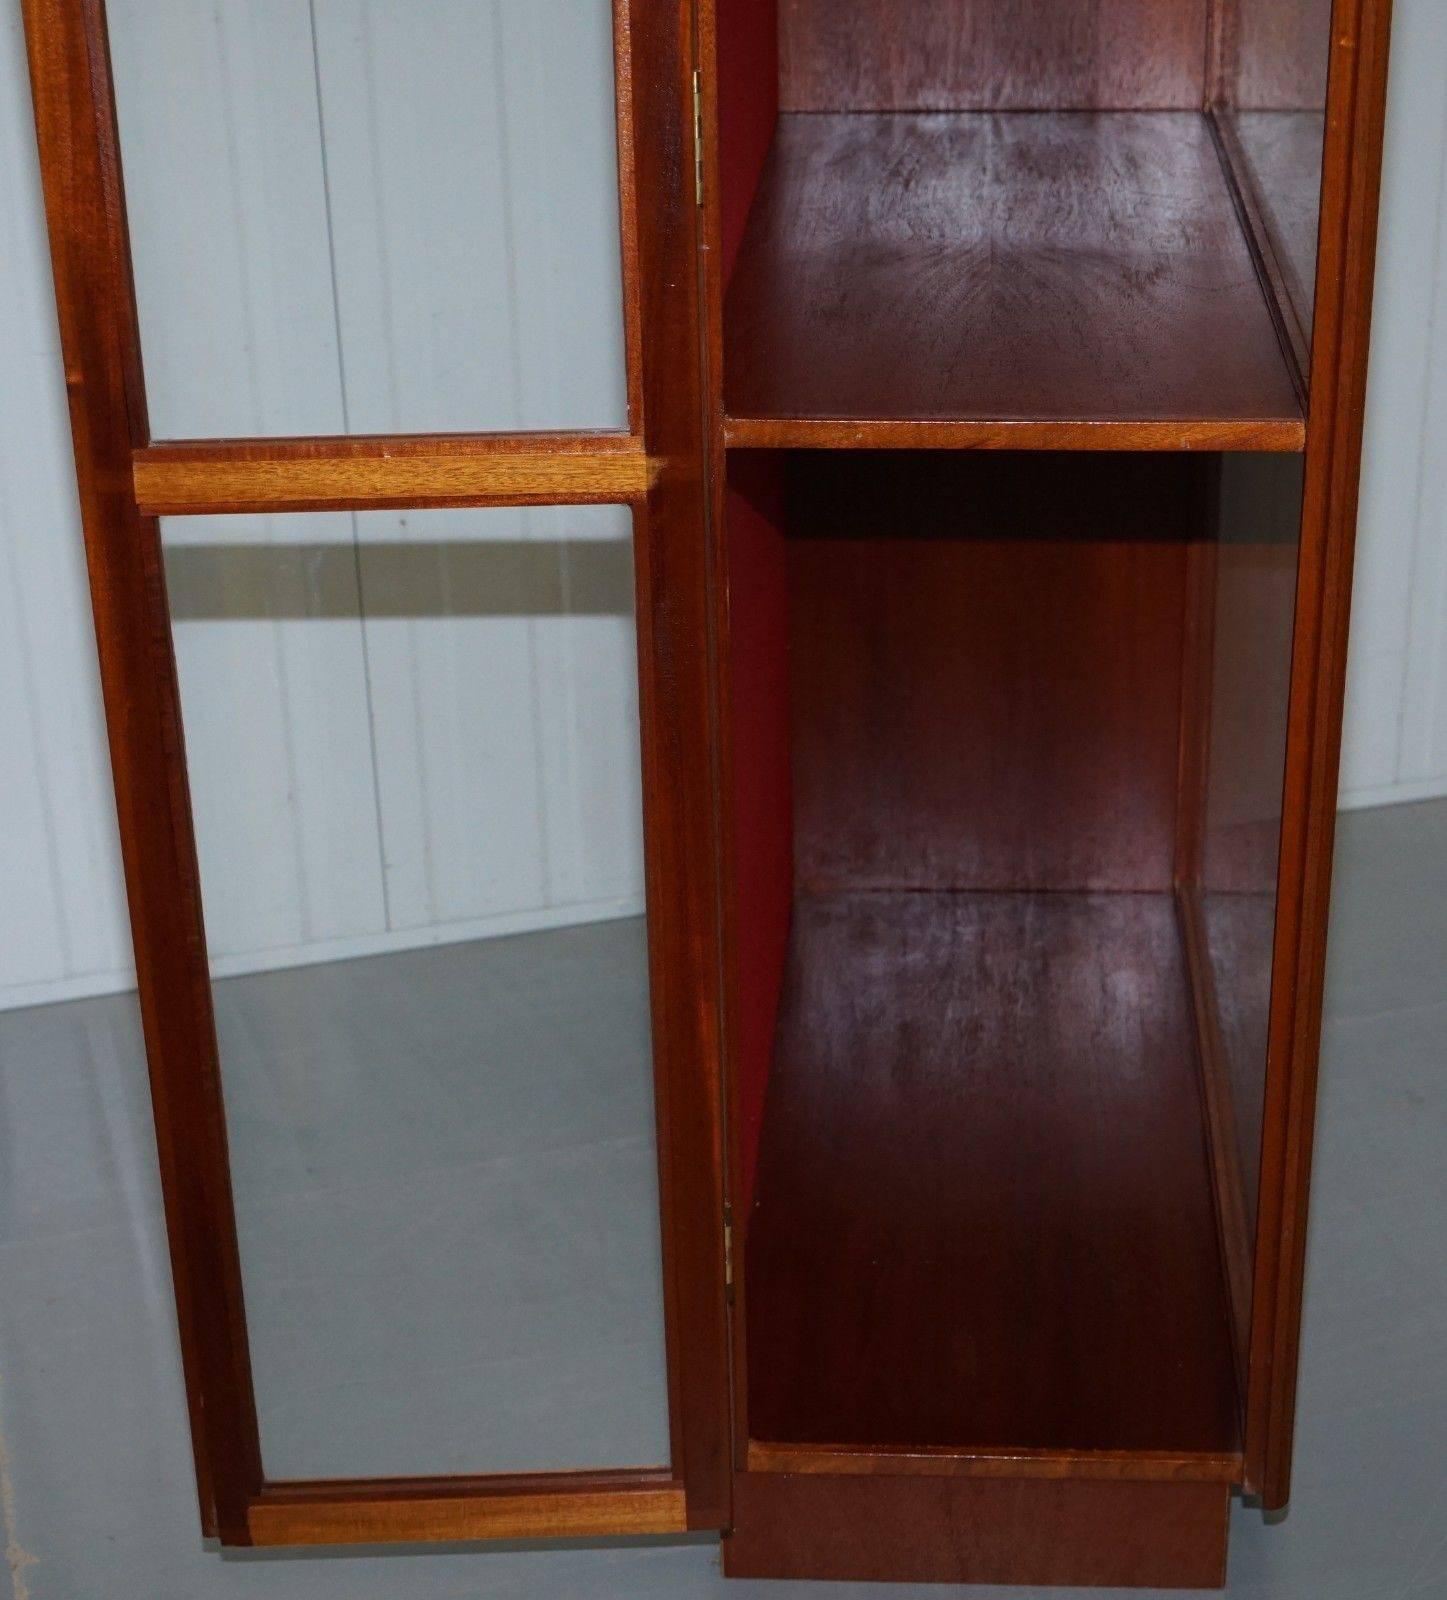 Glass Vintage Mahogany Large Shop Display Cabinet Glazed Locked to the Side Taxidermy